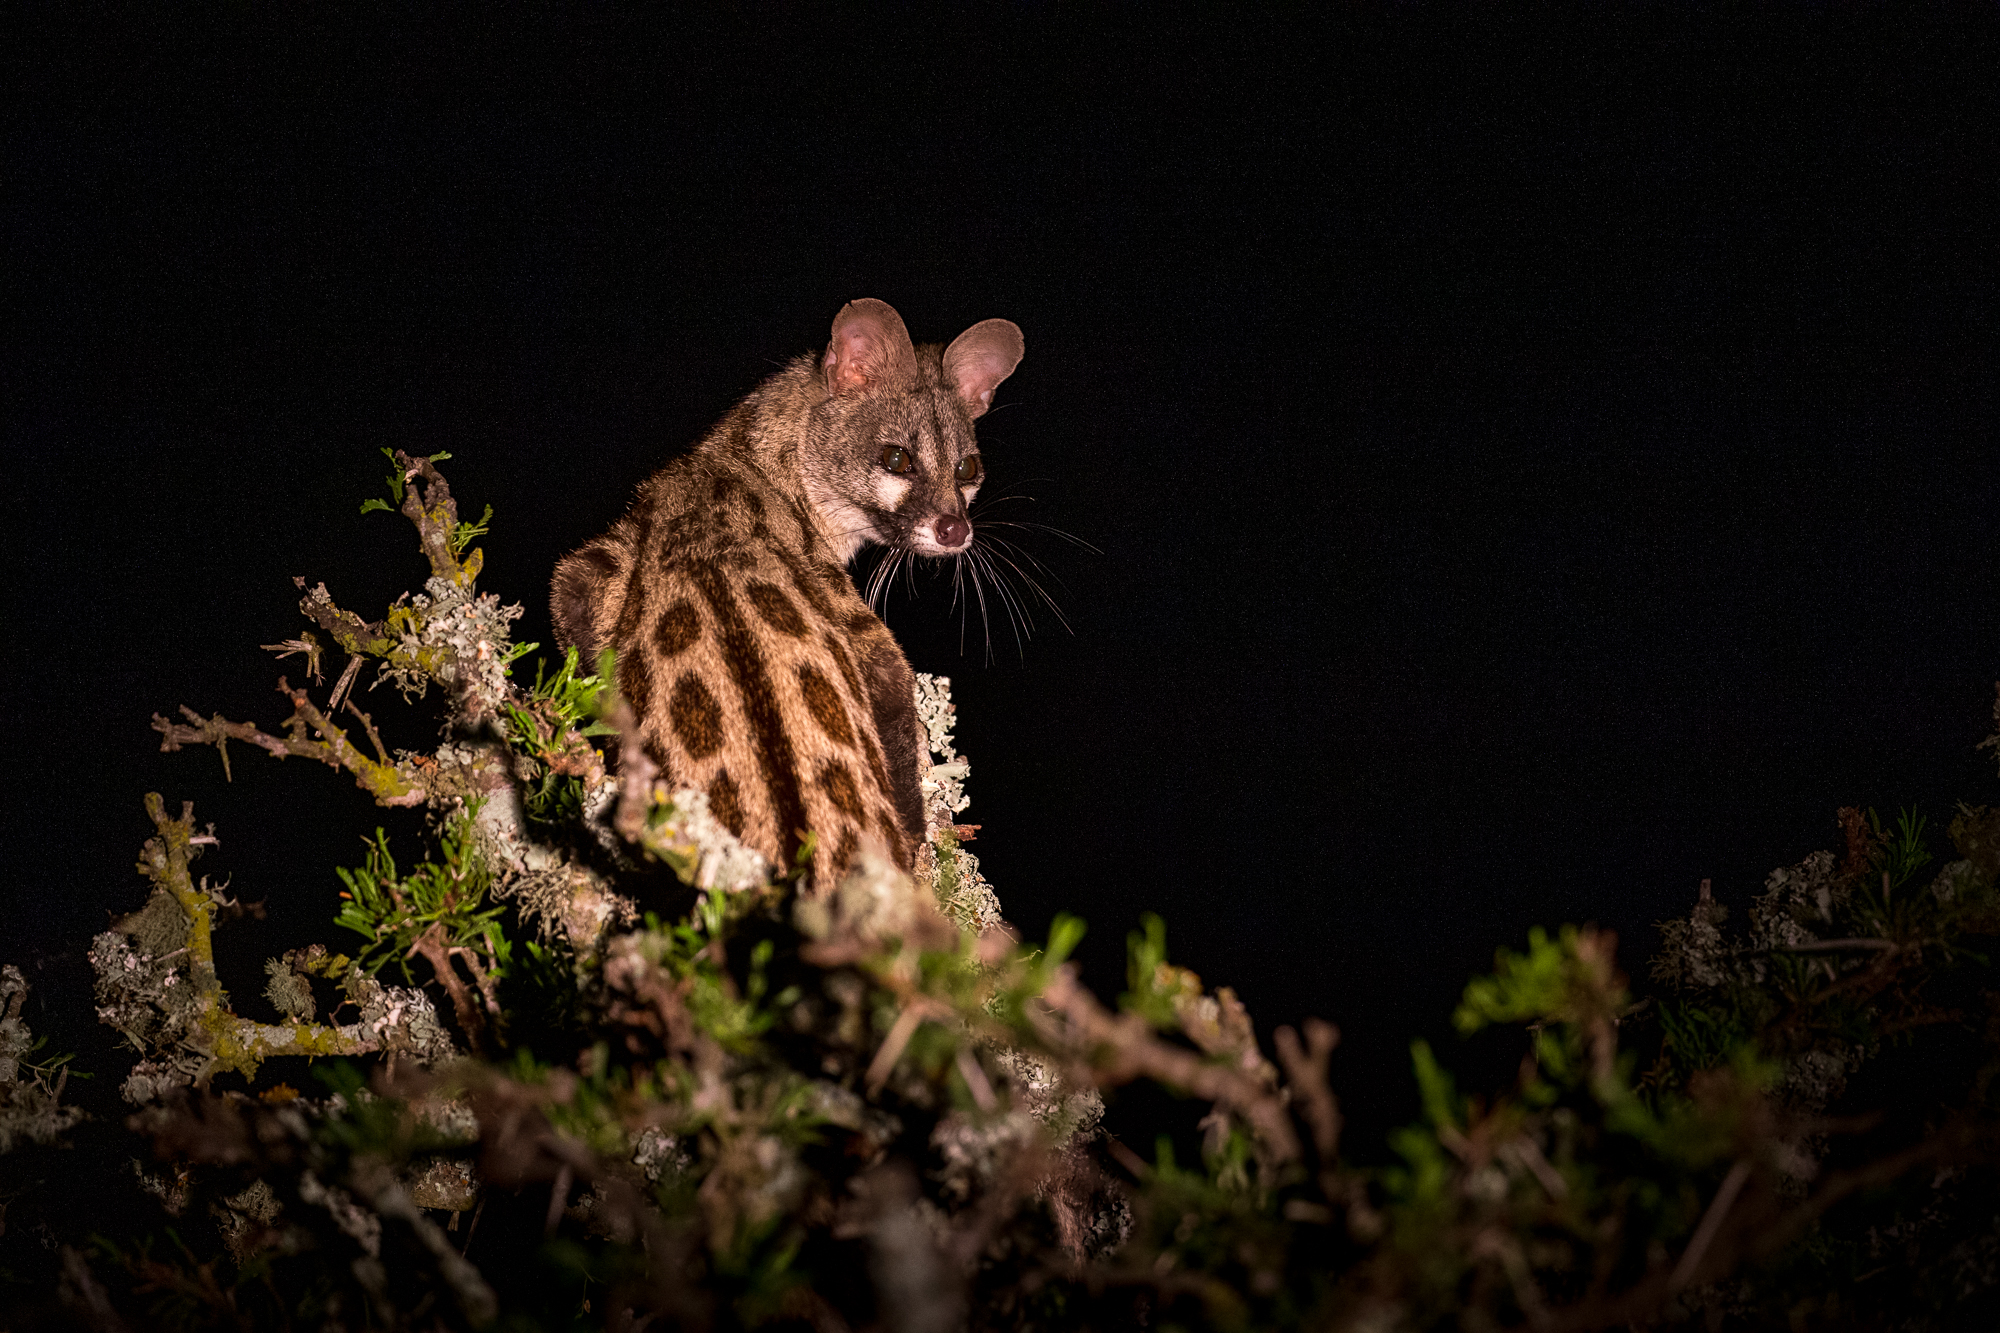 South African Large-Spotted Genet by Brendon Jennings